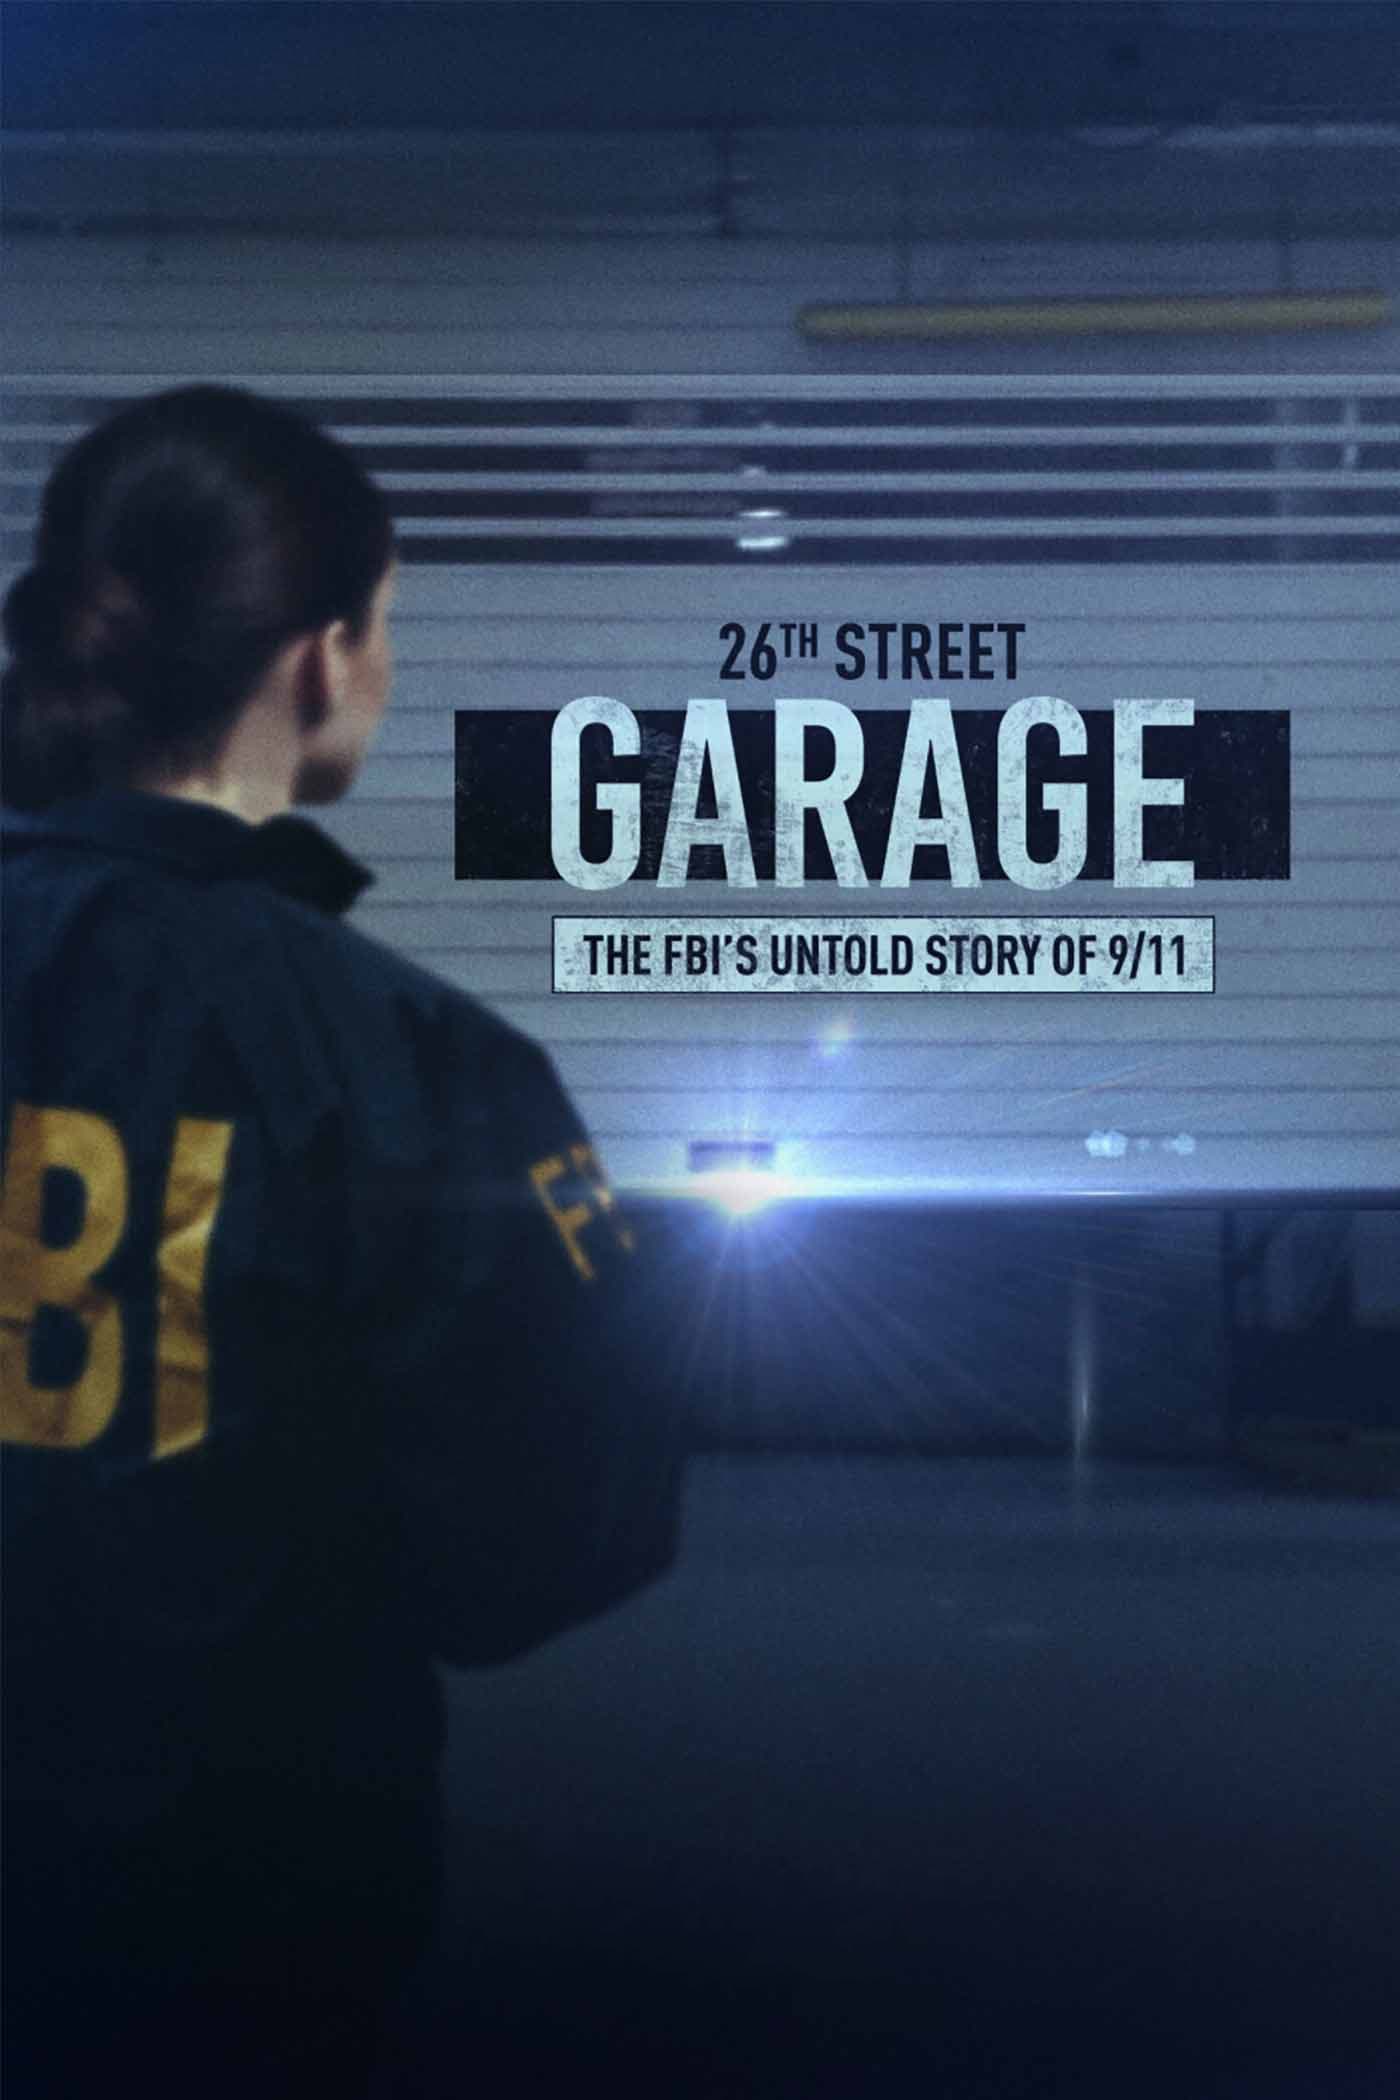 The 26th Street Garage: The FBI's Untold Story of 9/11 (2021)